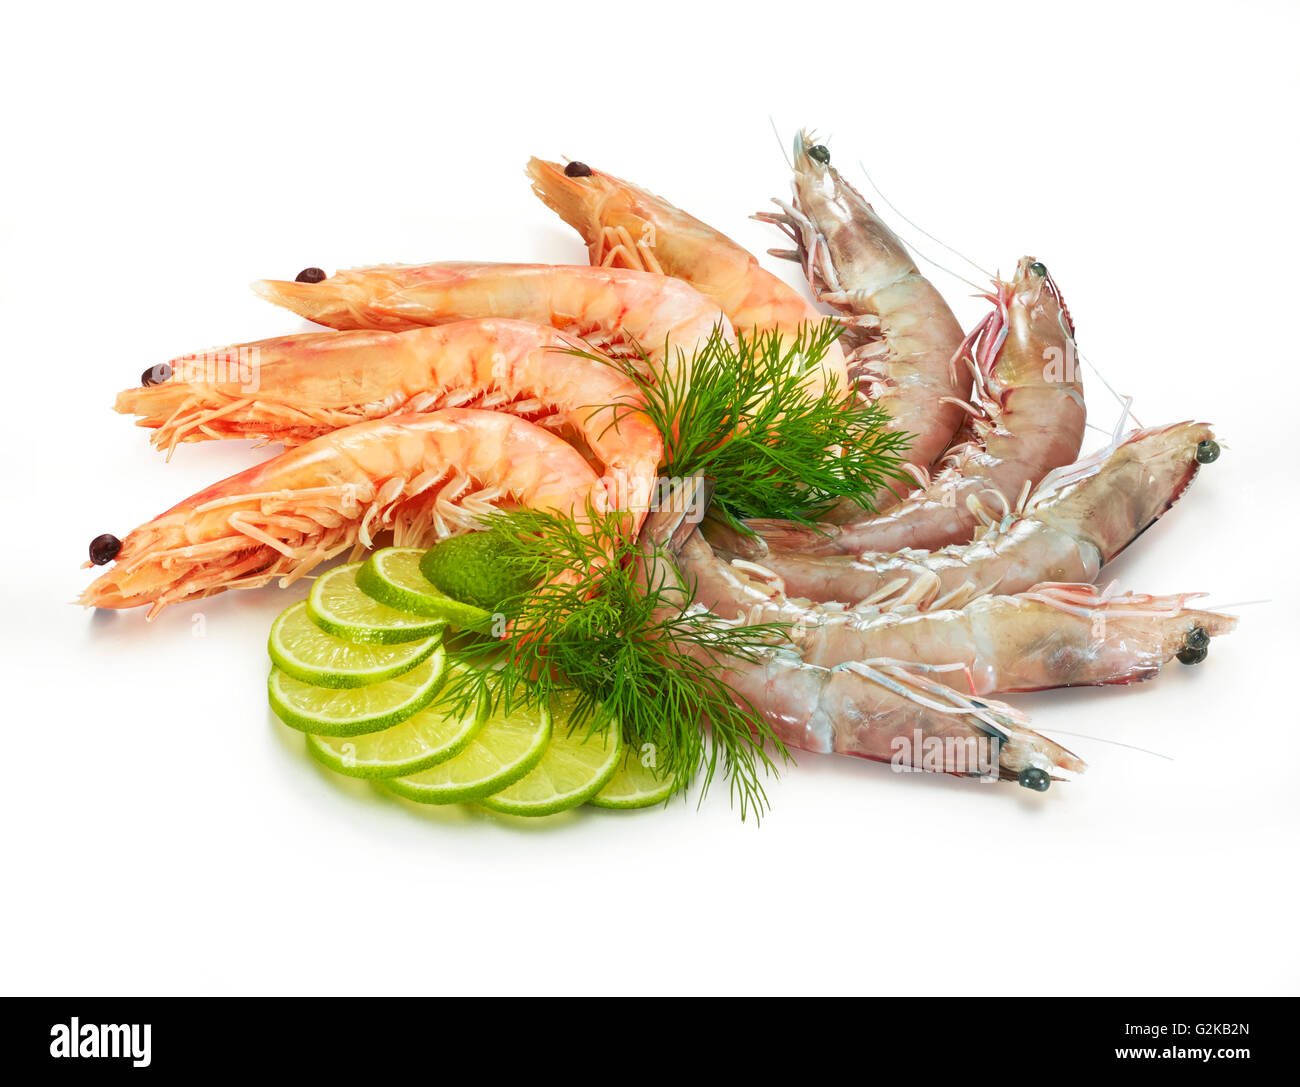 Boiled and raw prawns, lime slices (Citrus aurantifolia) and dill (Anethum graveolens), white background Stock Photo